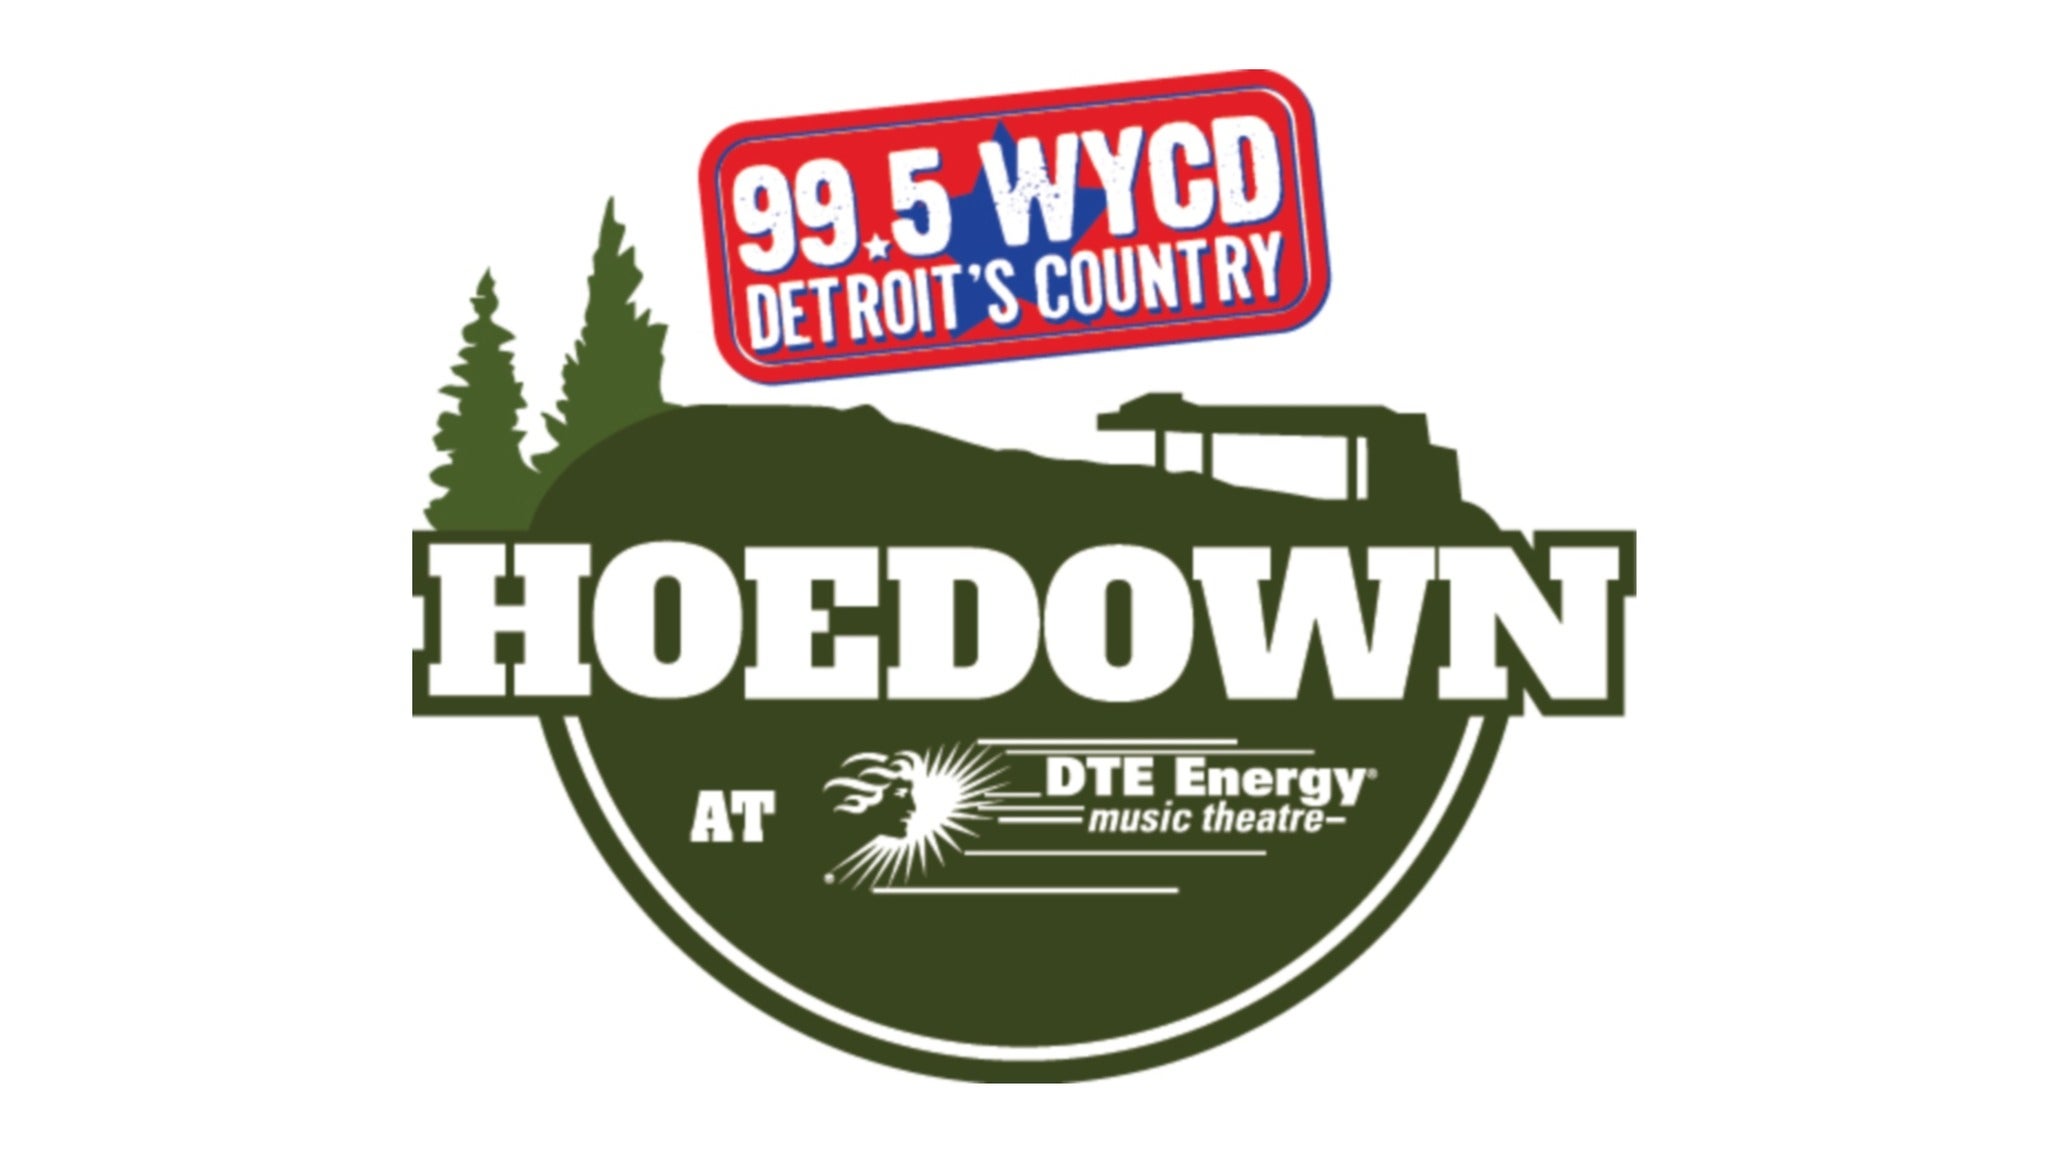 99.5 WYCD Hoedown Featuring Lady A in Clarkston promo photo for VIP Package presale offer code